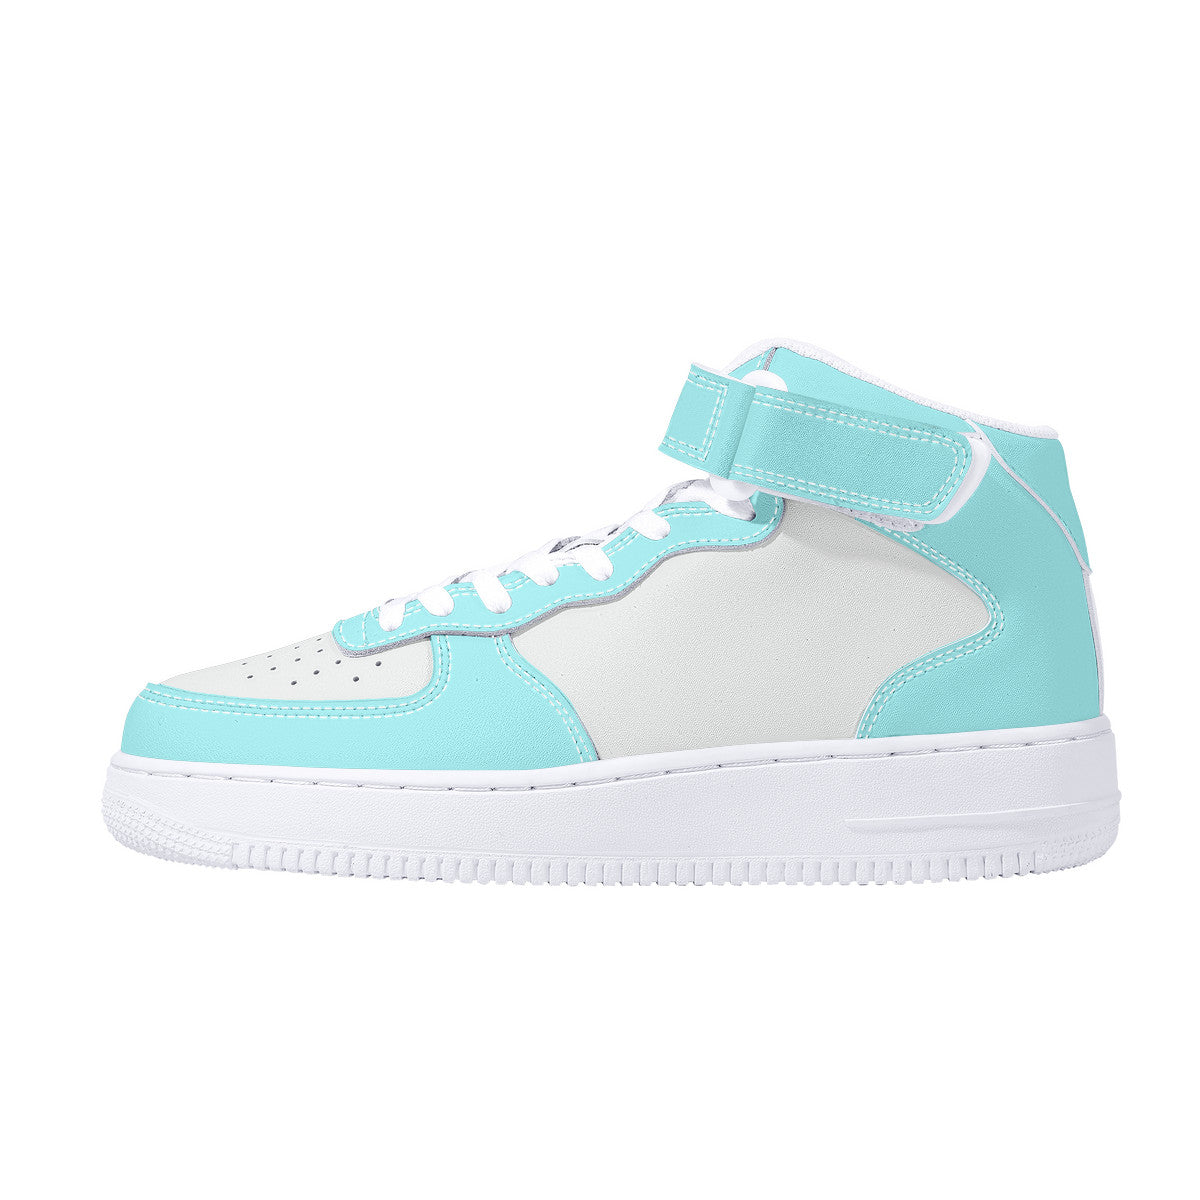 Create Your Own High Top Unisex Sneaker